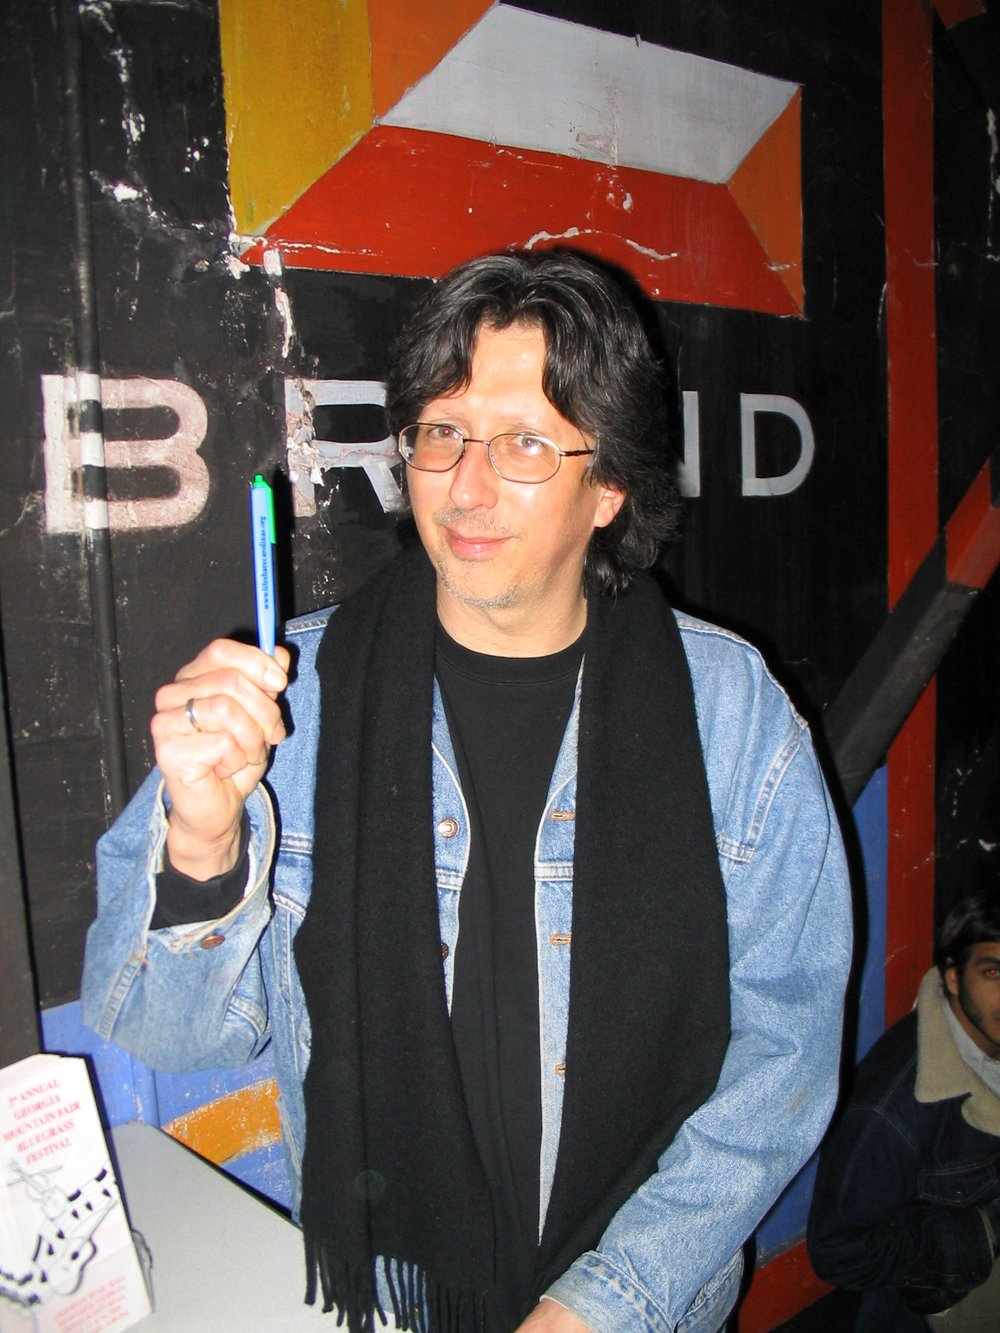 Fred Mills at Arcade Fire 2005.JPG